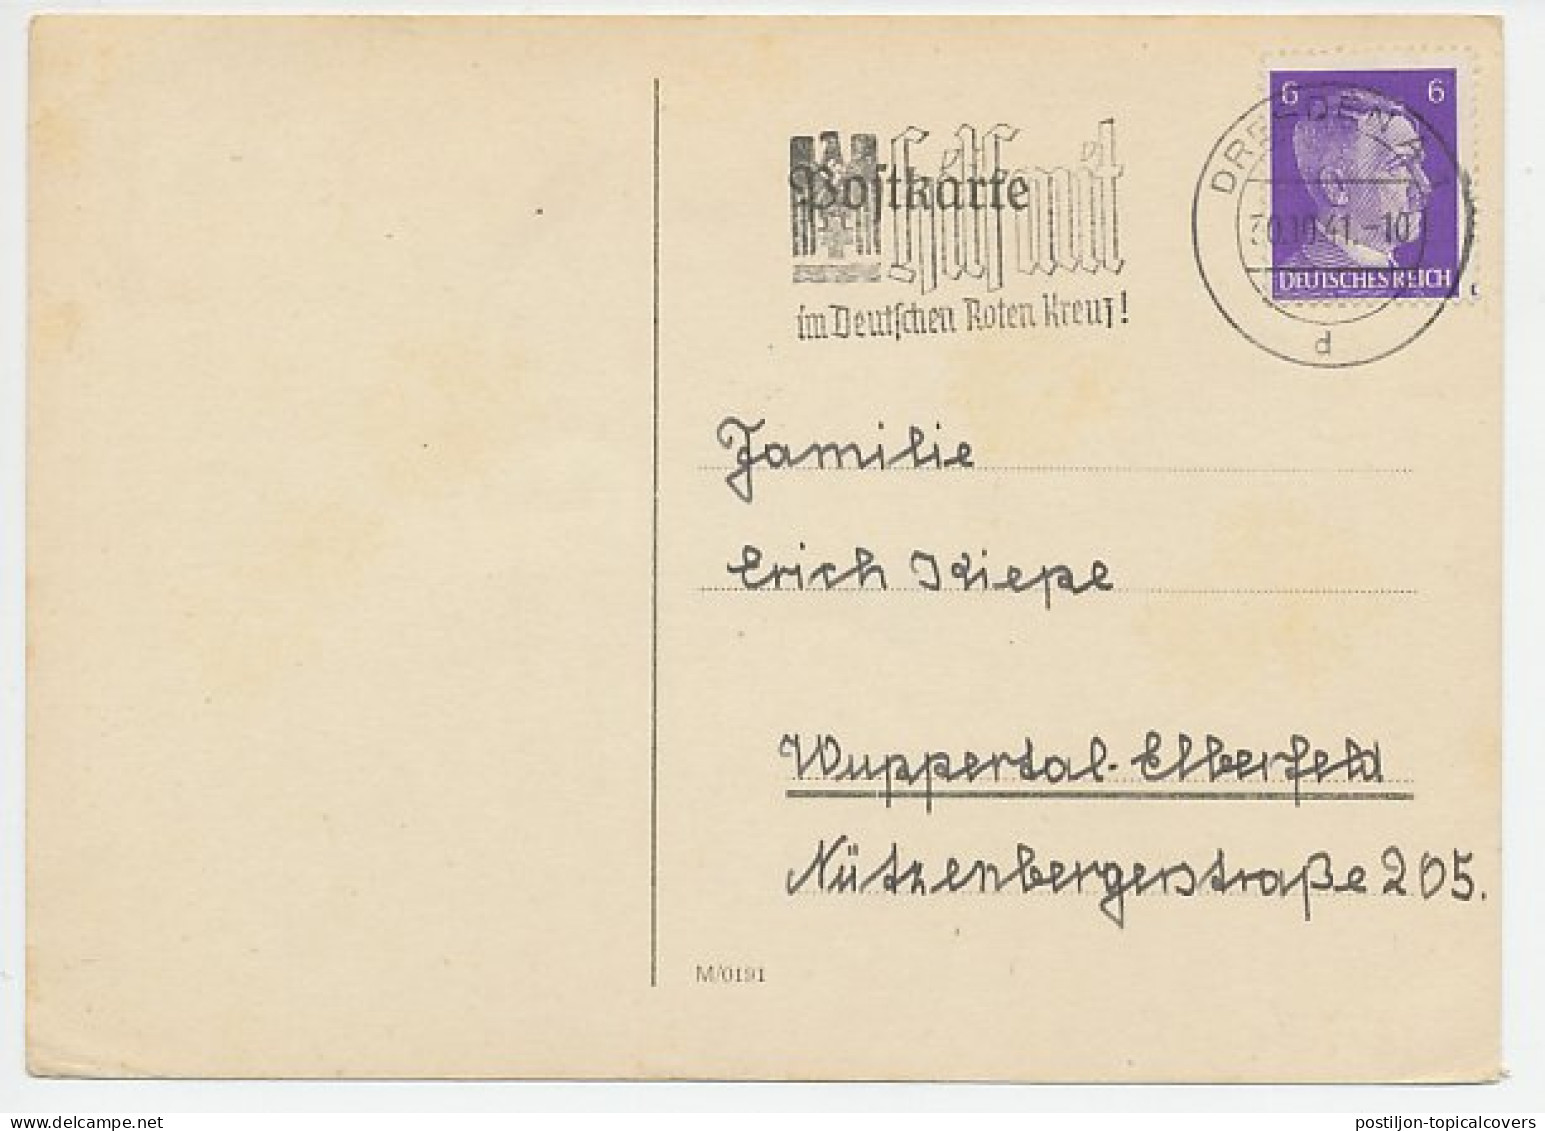 Cover / Postmark Deutsches Reich / Germany 1941 Red Cross - Assist - Croce Rossa